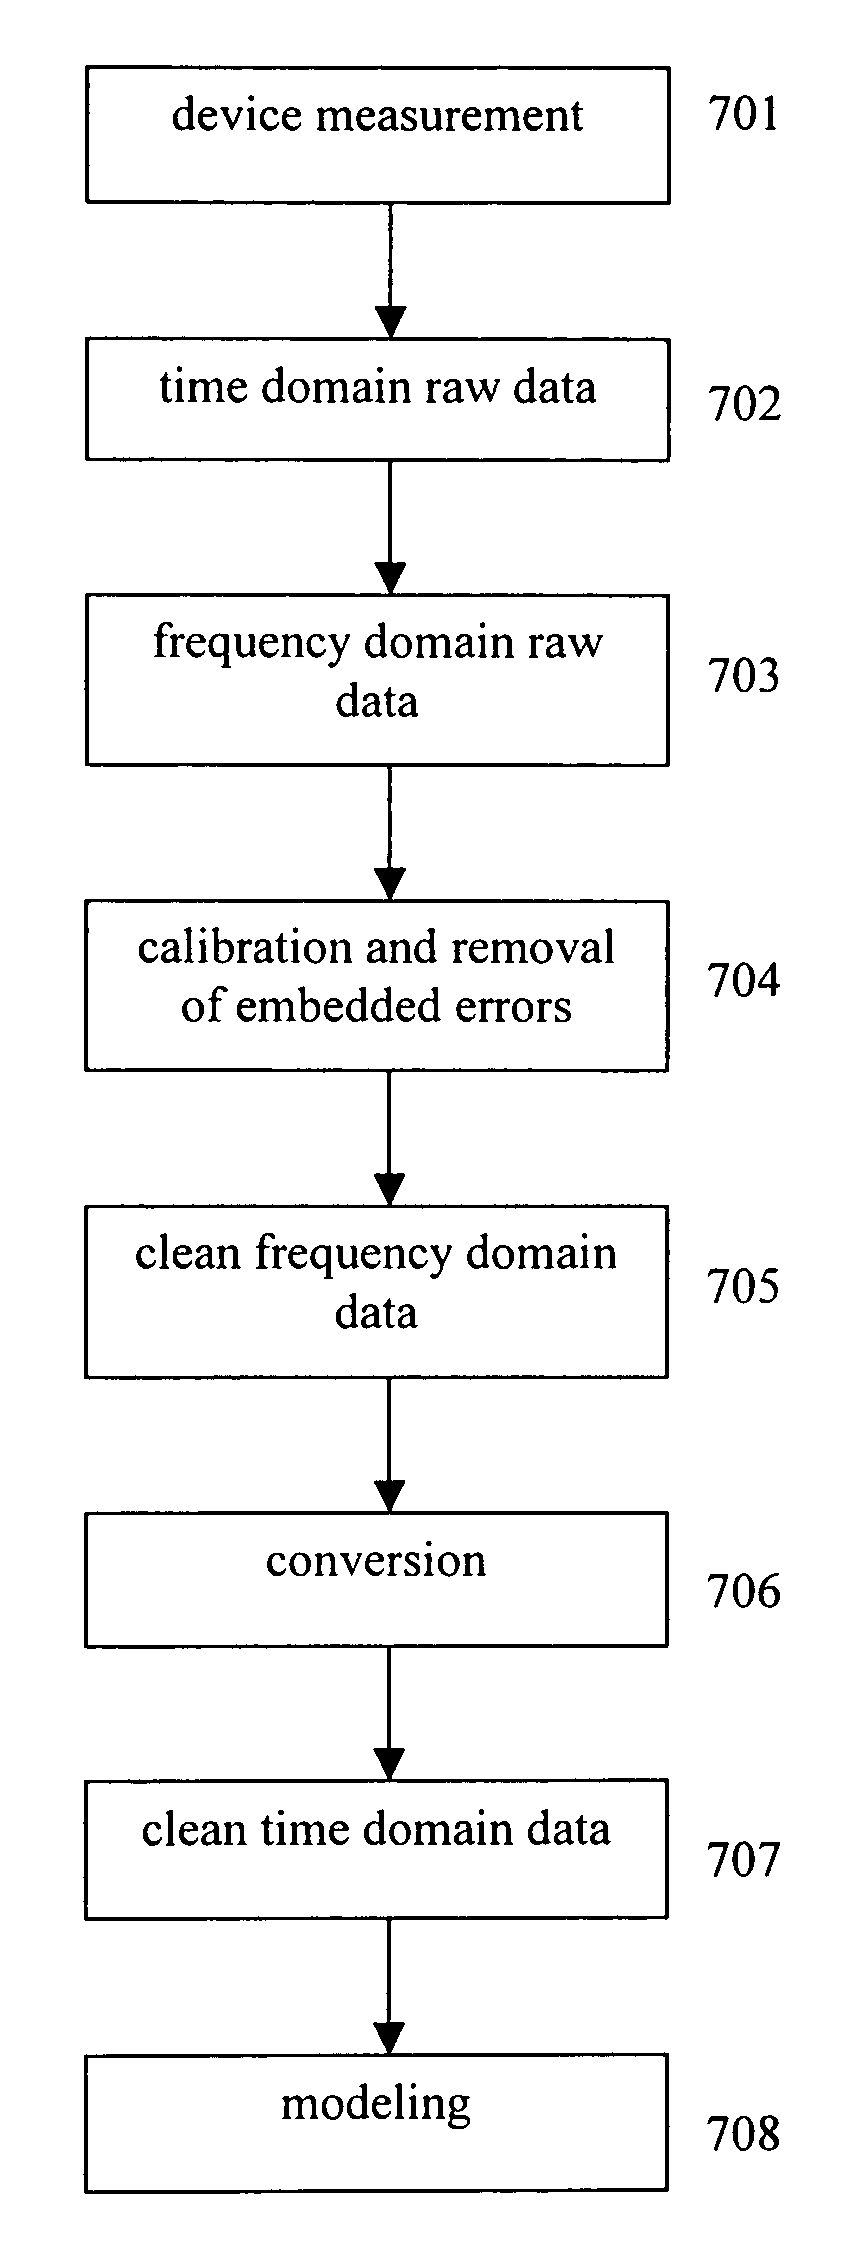 Method and system for wideband device measurement and modeling